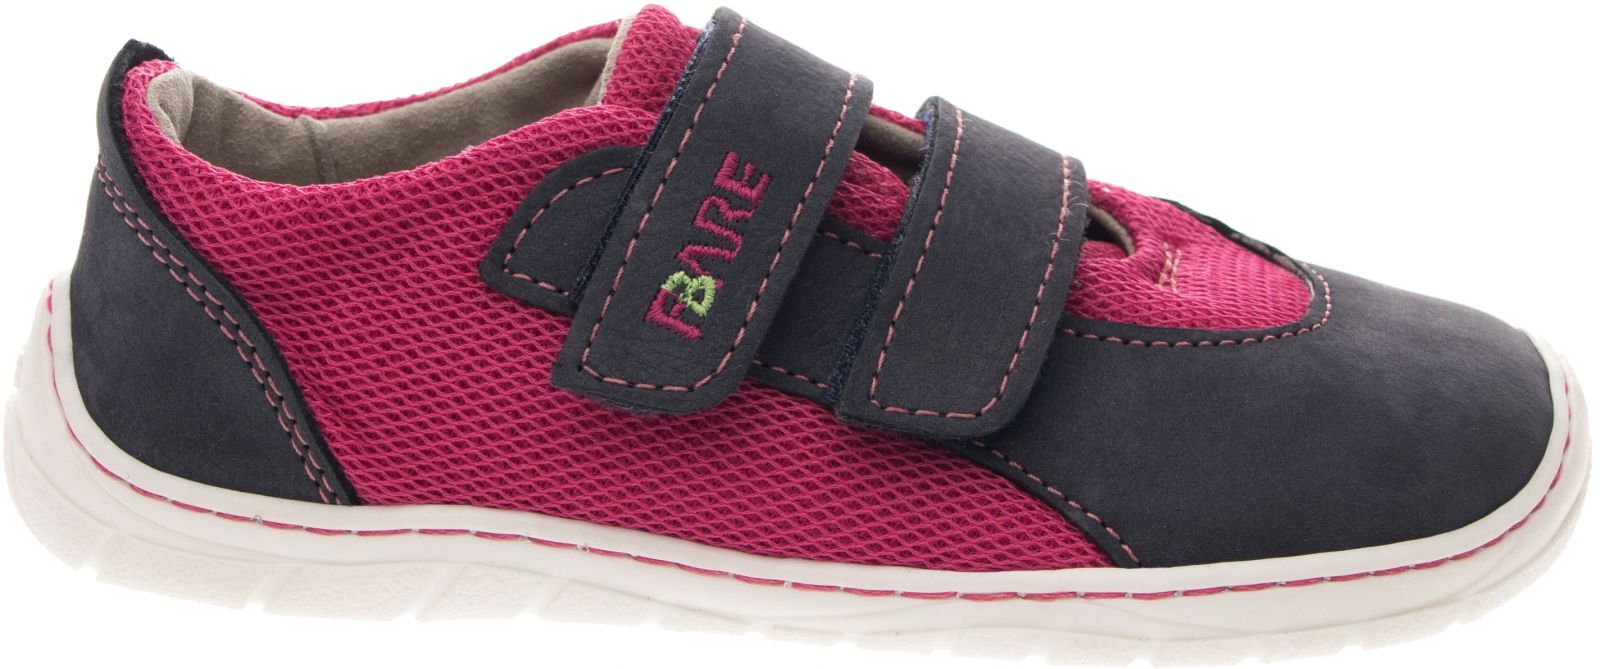 Barefoot Fare bare childrens sneakers B5416251